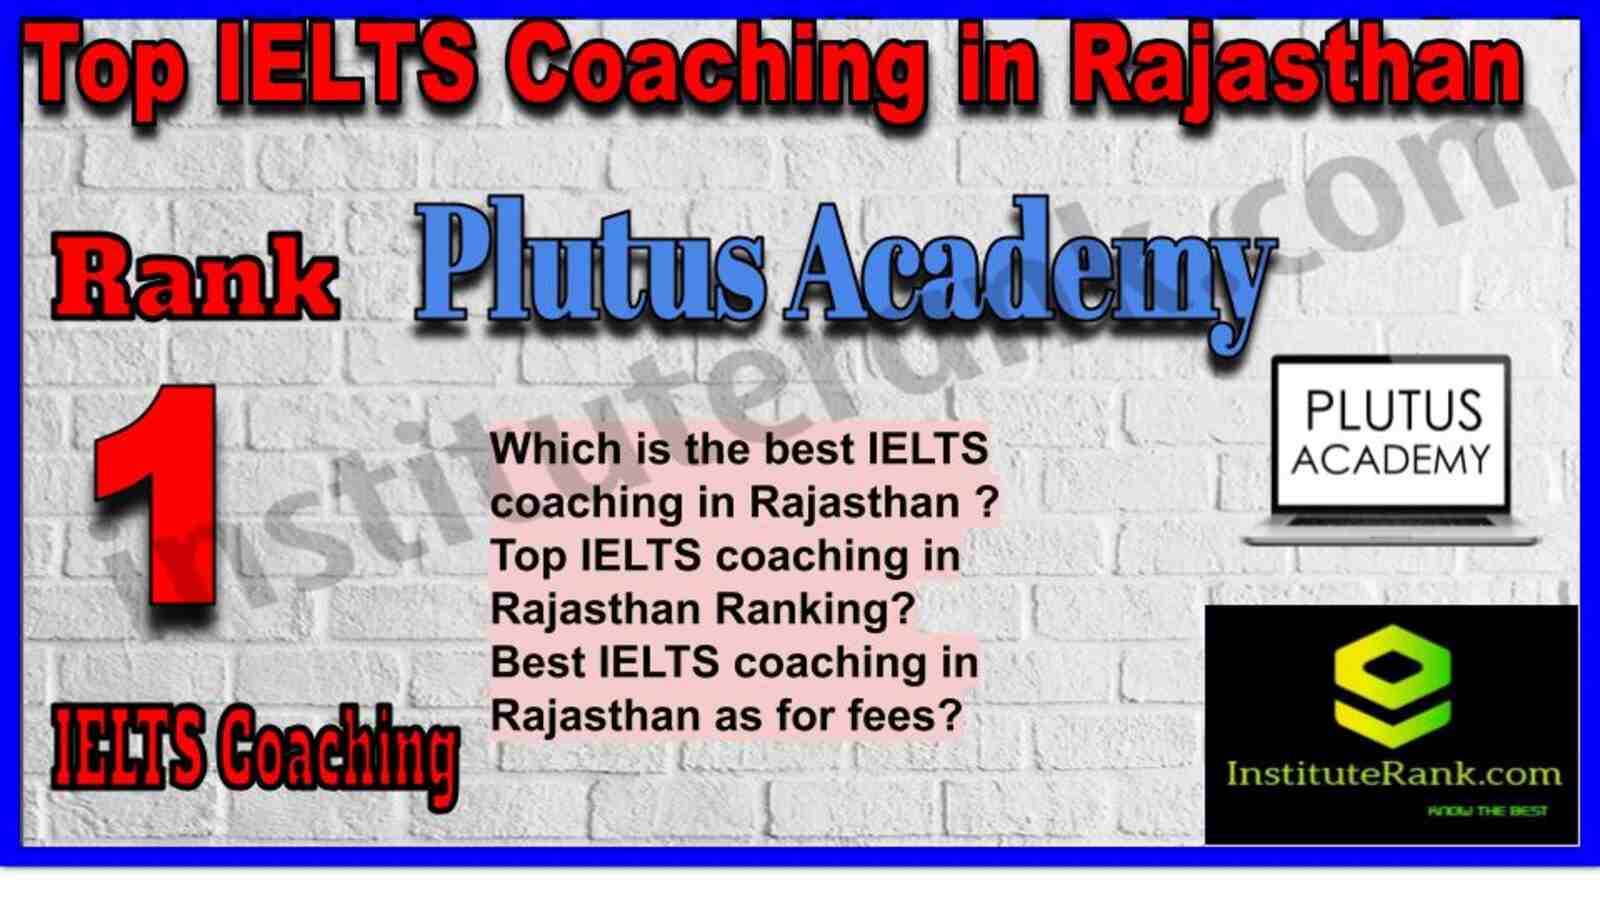 Rank 1. Plutus Academy | Best IELTS Coaching in Rajasthan